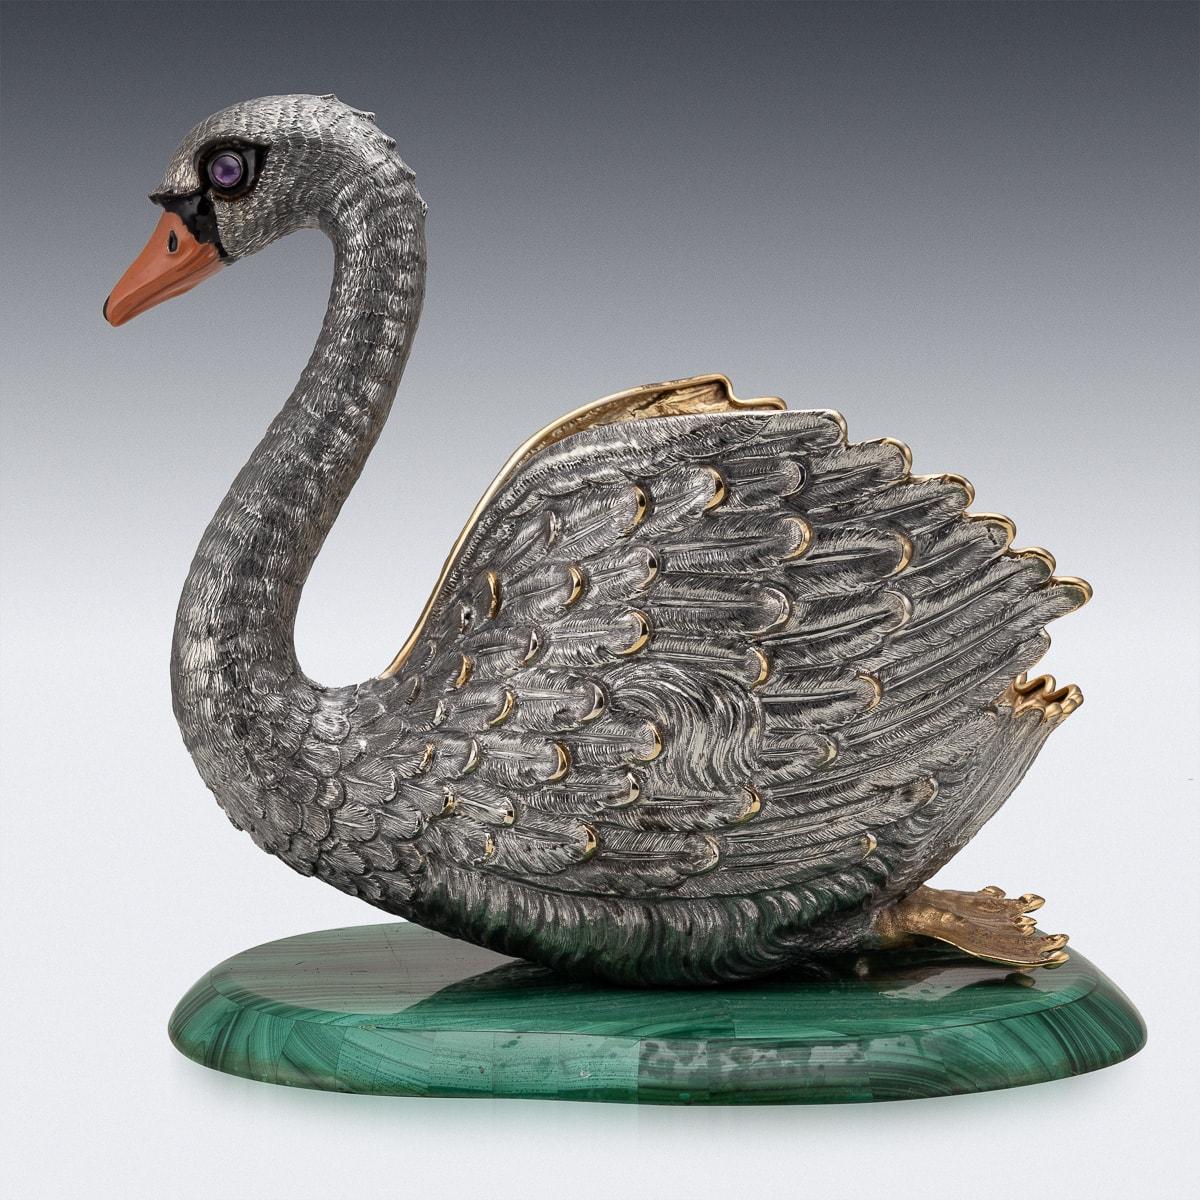 Elegant 20th Century Italian solid silver jardiniere or wine cooler, swan shaped, crafted in solid silver this magnificent swan champagne wine cooler, has an enamelled beak and glass eyes, richly gilded inside, sitting on a large piece of malachite,